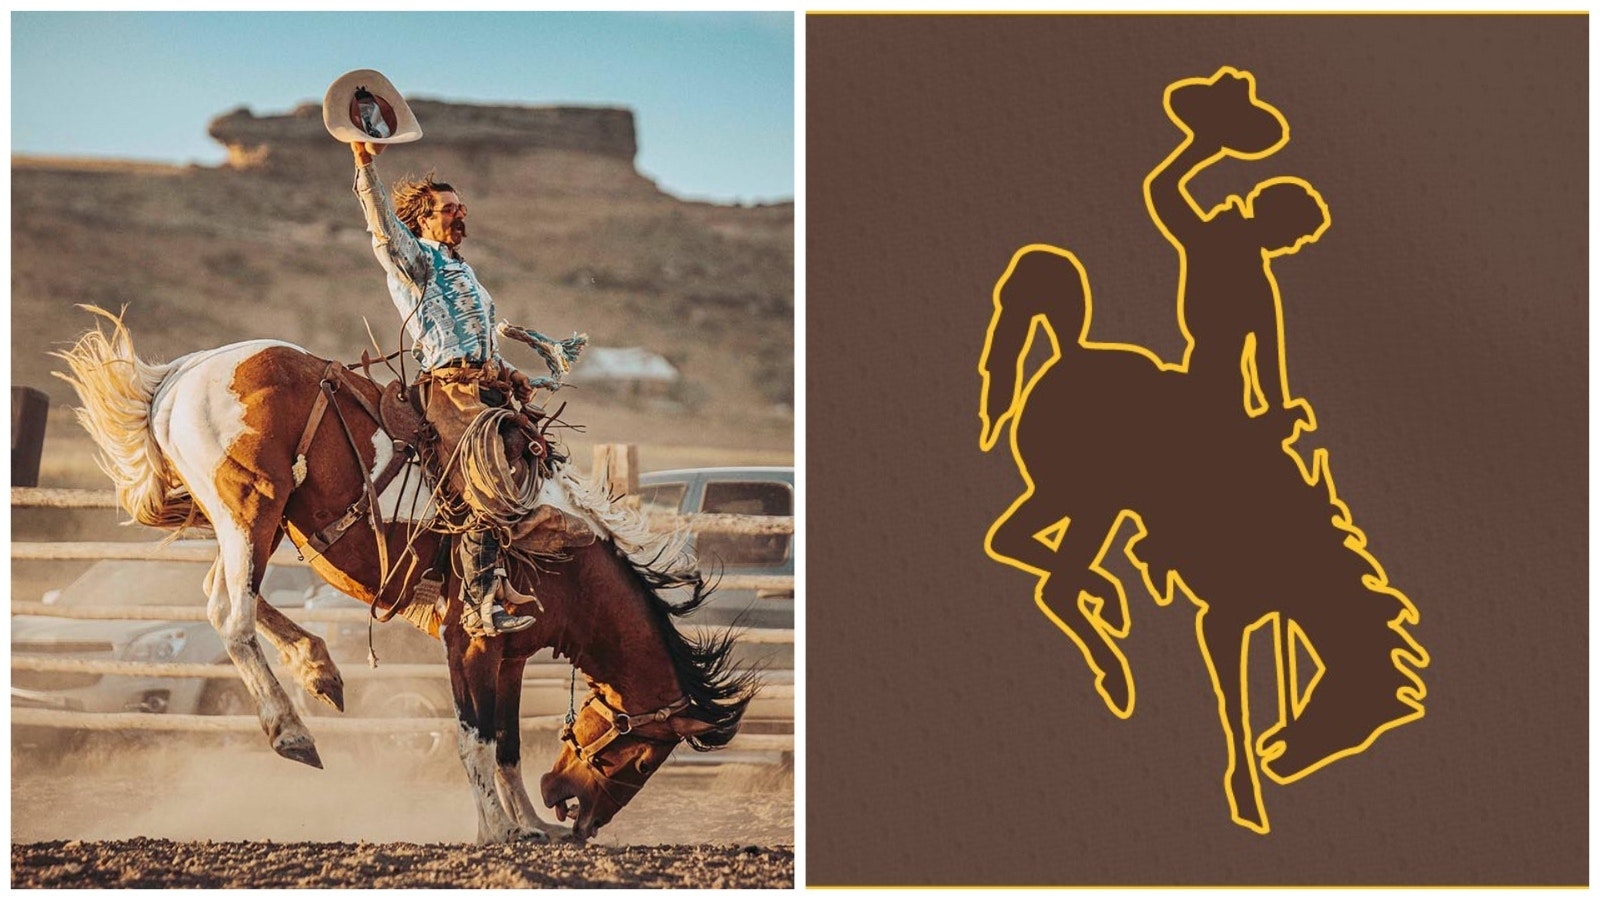 A side-by-side comparison shows the similarities between Michael Magin's photo, left, and the Wyoming logo of Steamboat.